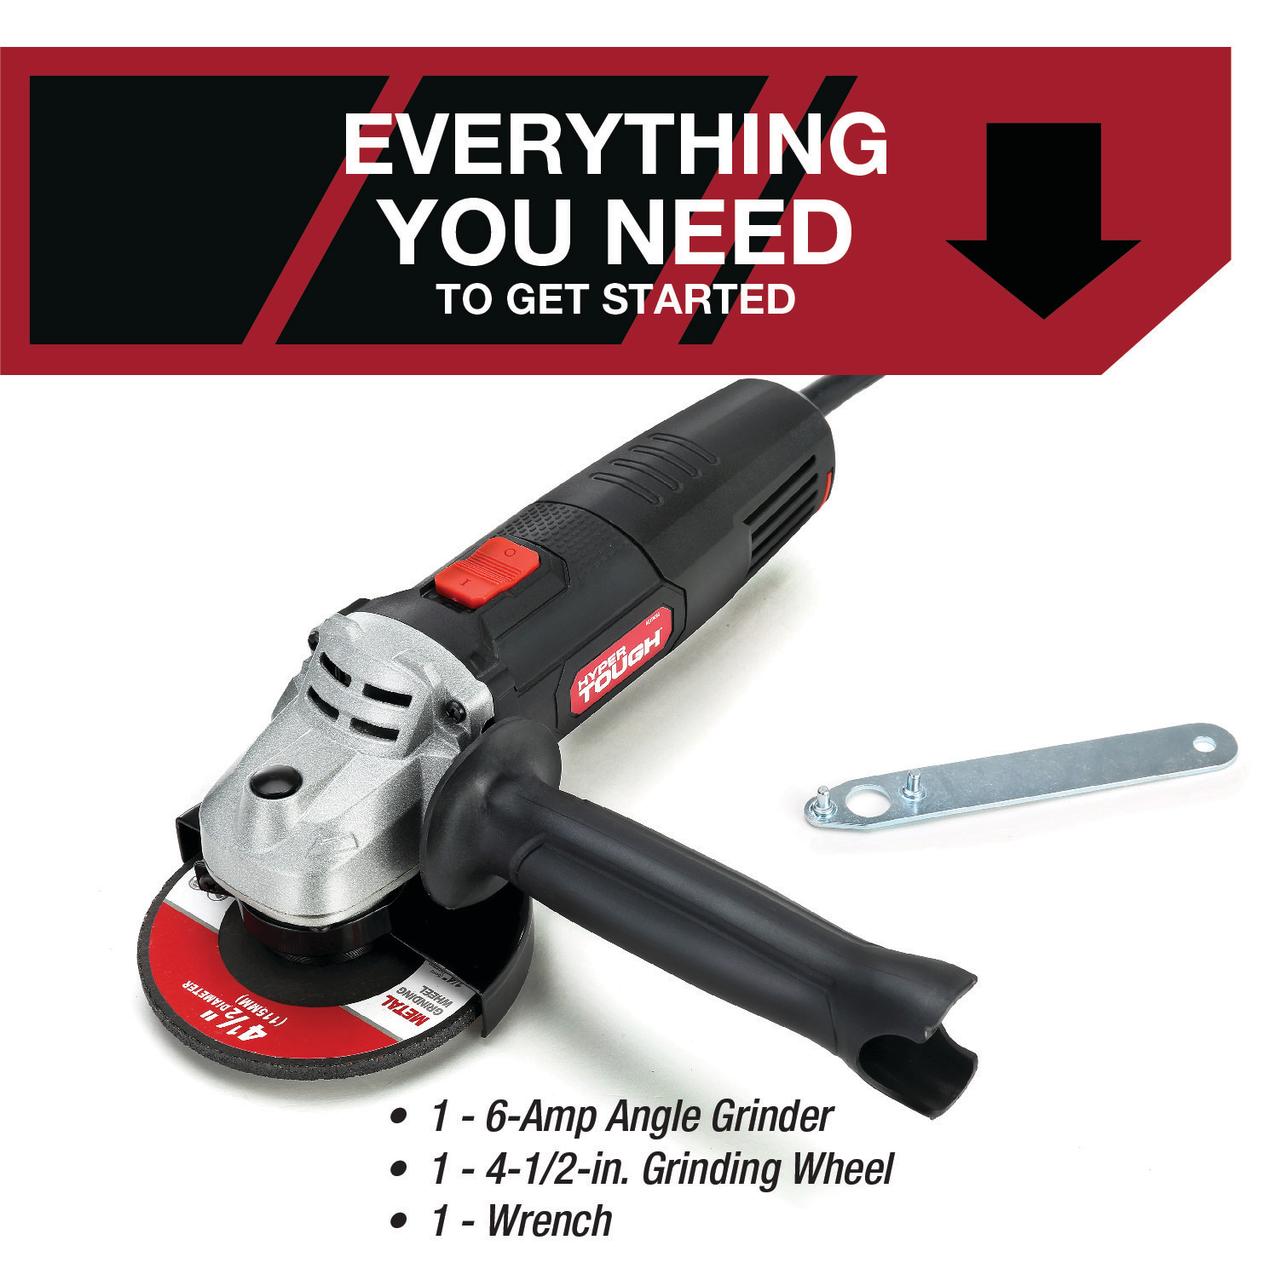 Hyper Tough 6 Amp Corded Angle Grinder with Handle, Adjustable Guard, 4-1/2 inch Grinding Wheel & Wrench - image 4 of 18